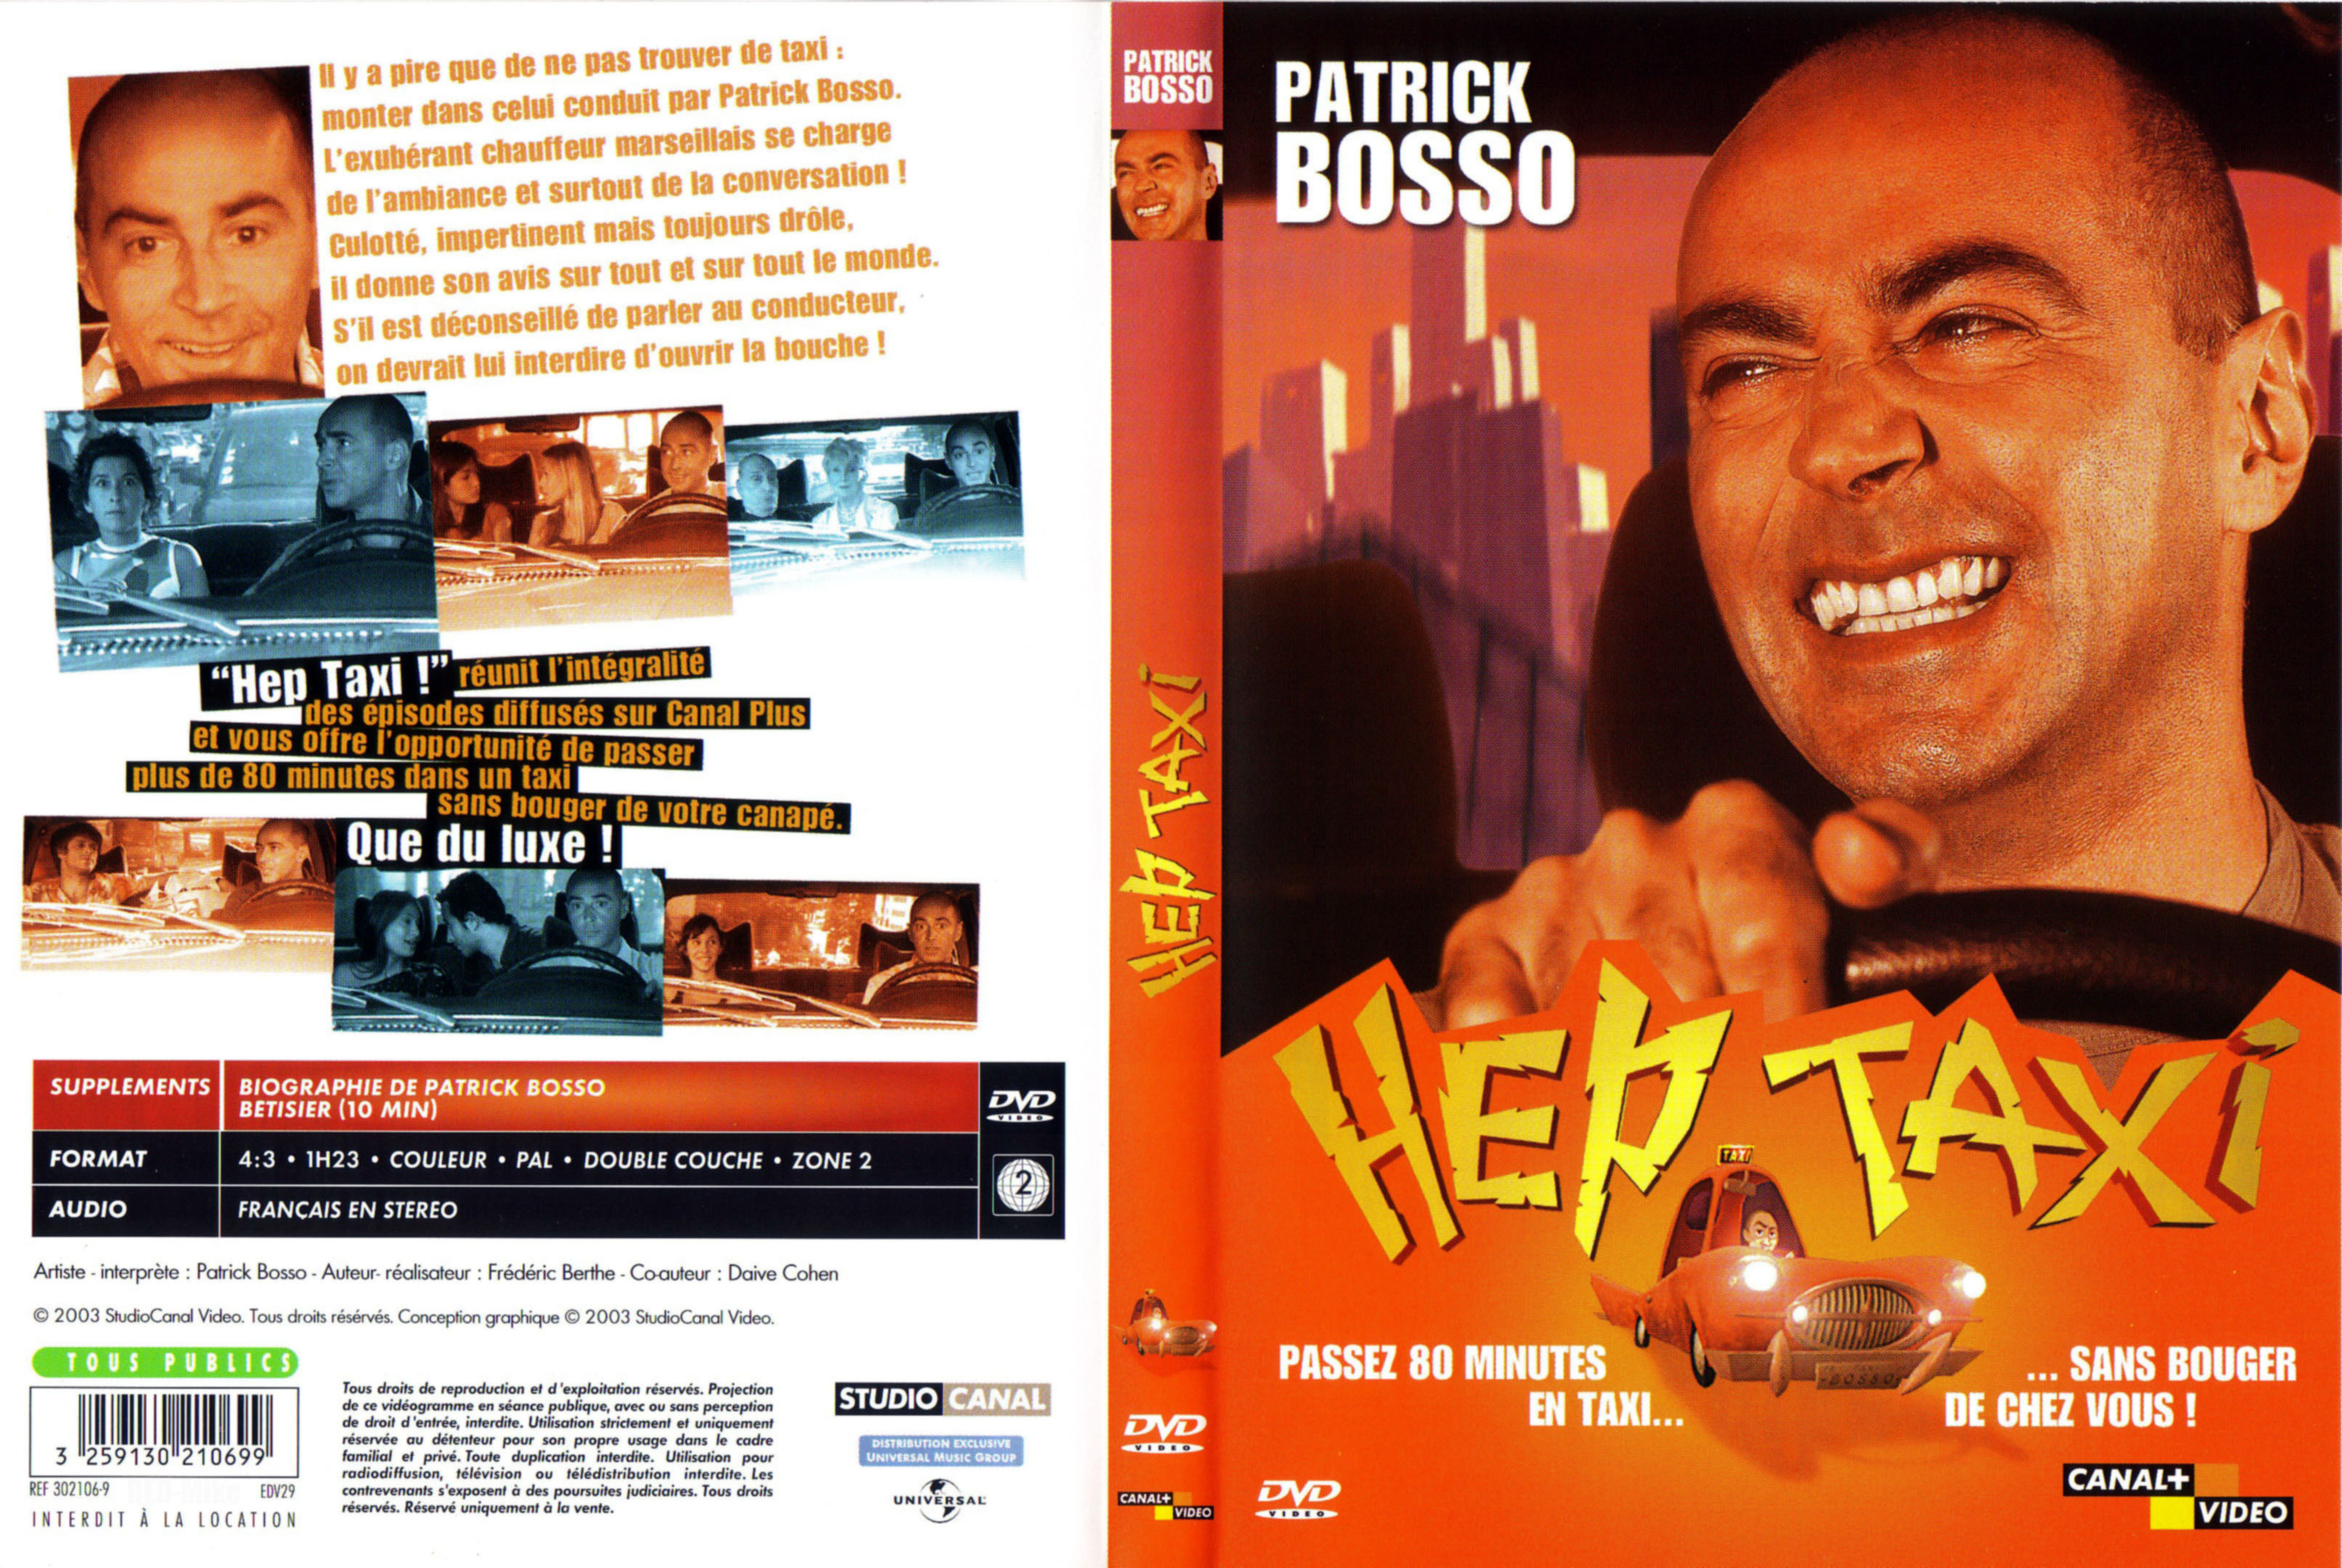 Jaquette DVD Patrick Bosso hep taxi